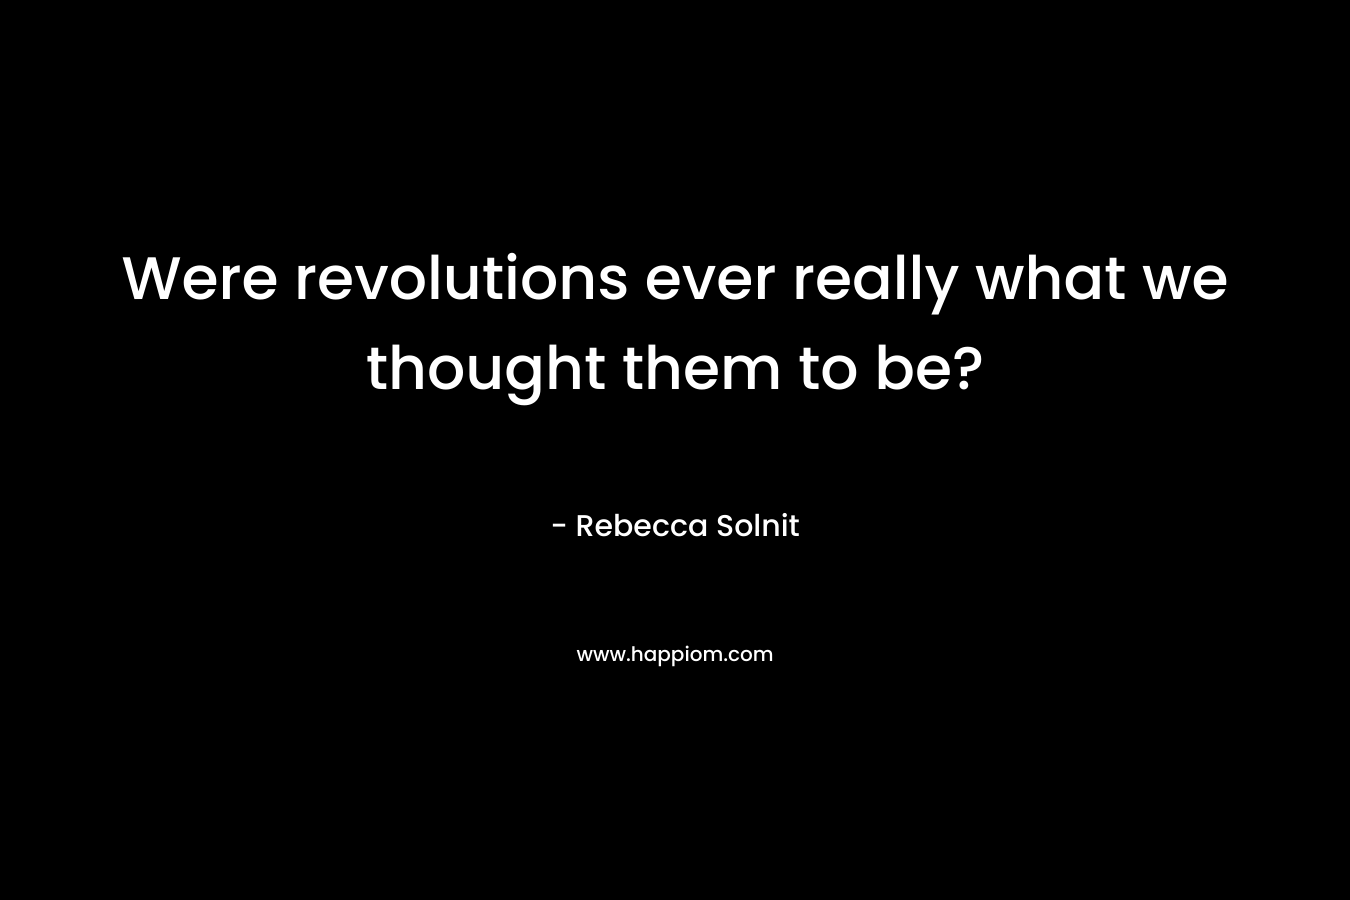 Were revolutions ever really what we thought them to be? – Rebecca Solnit